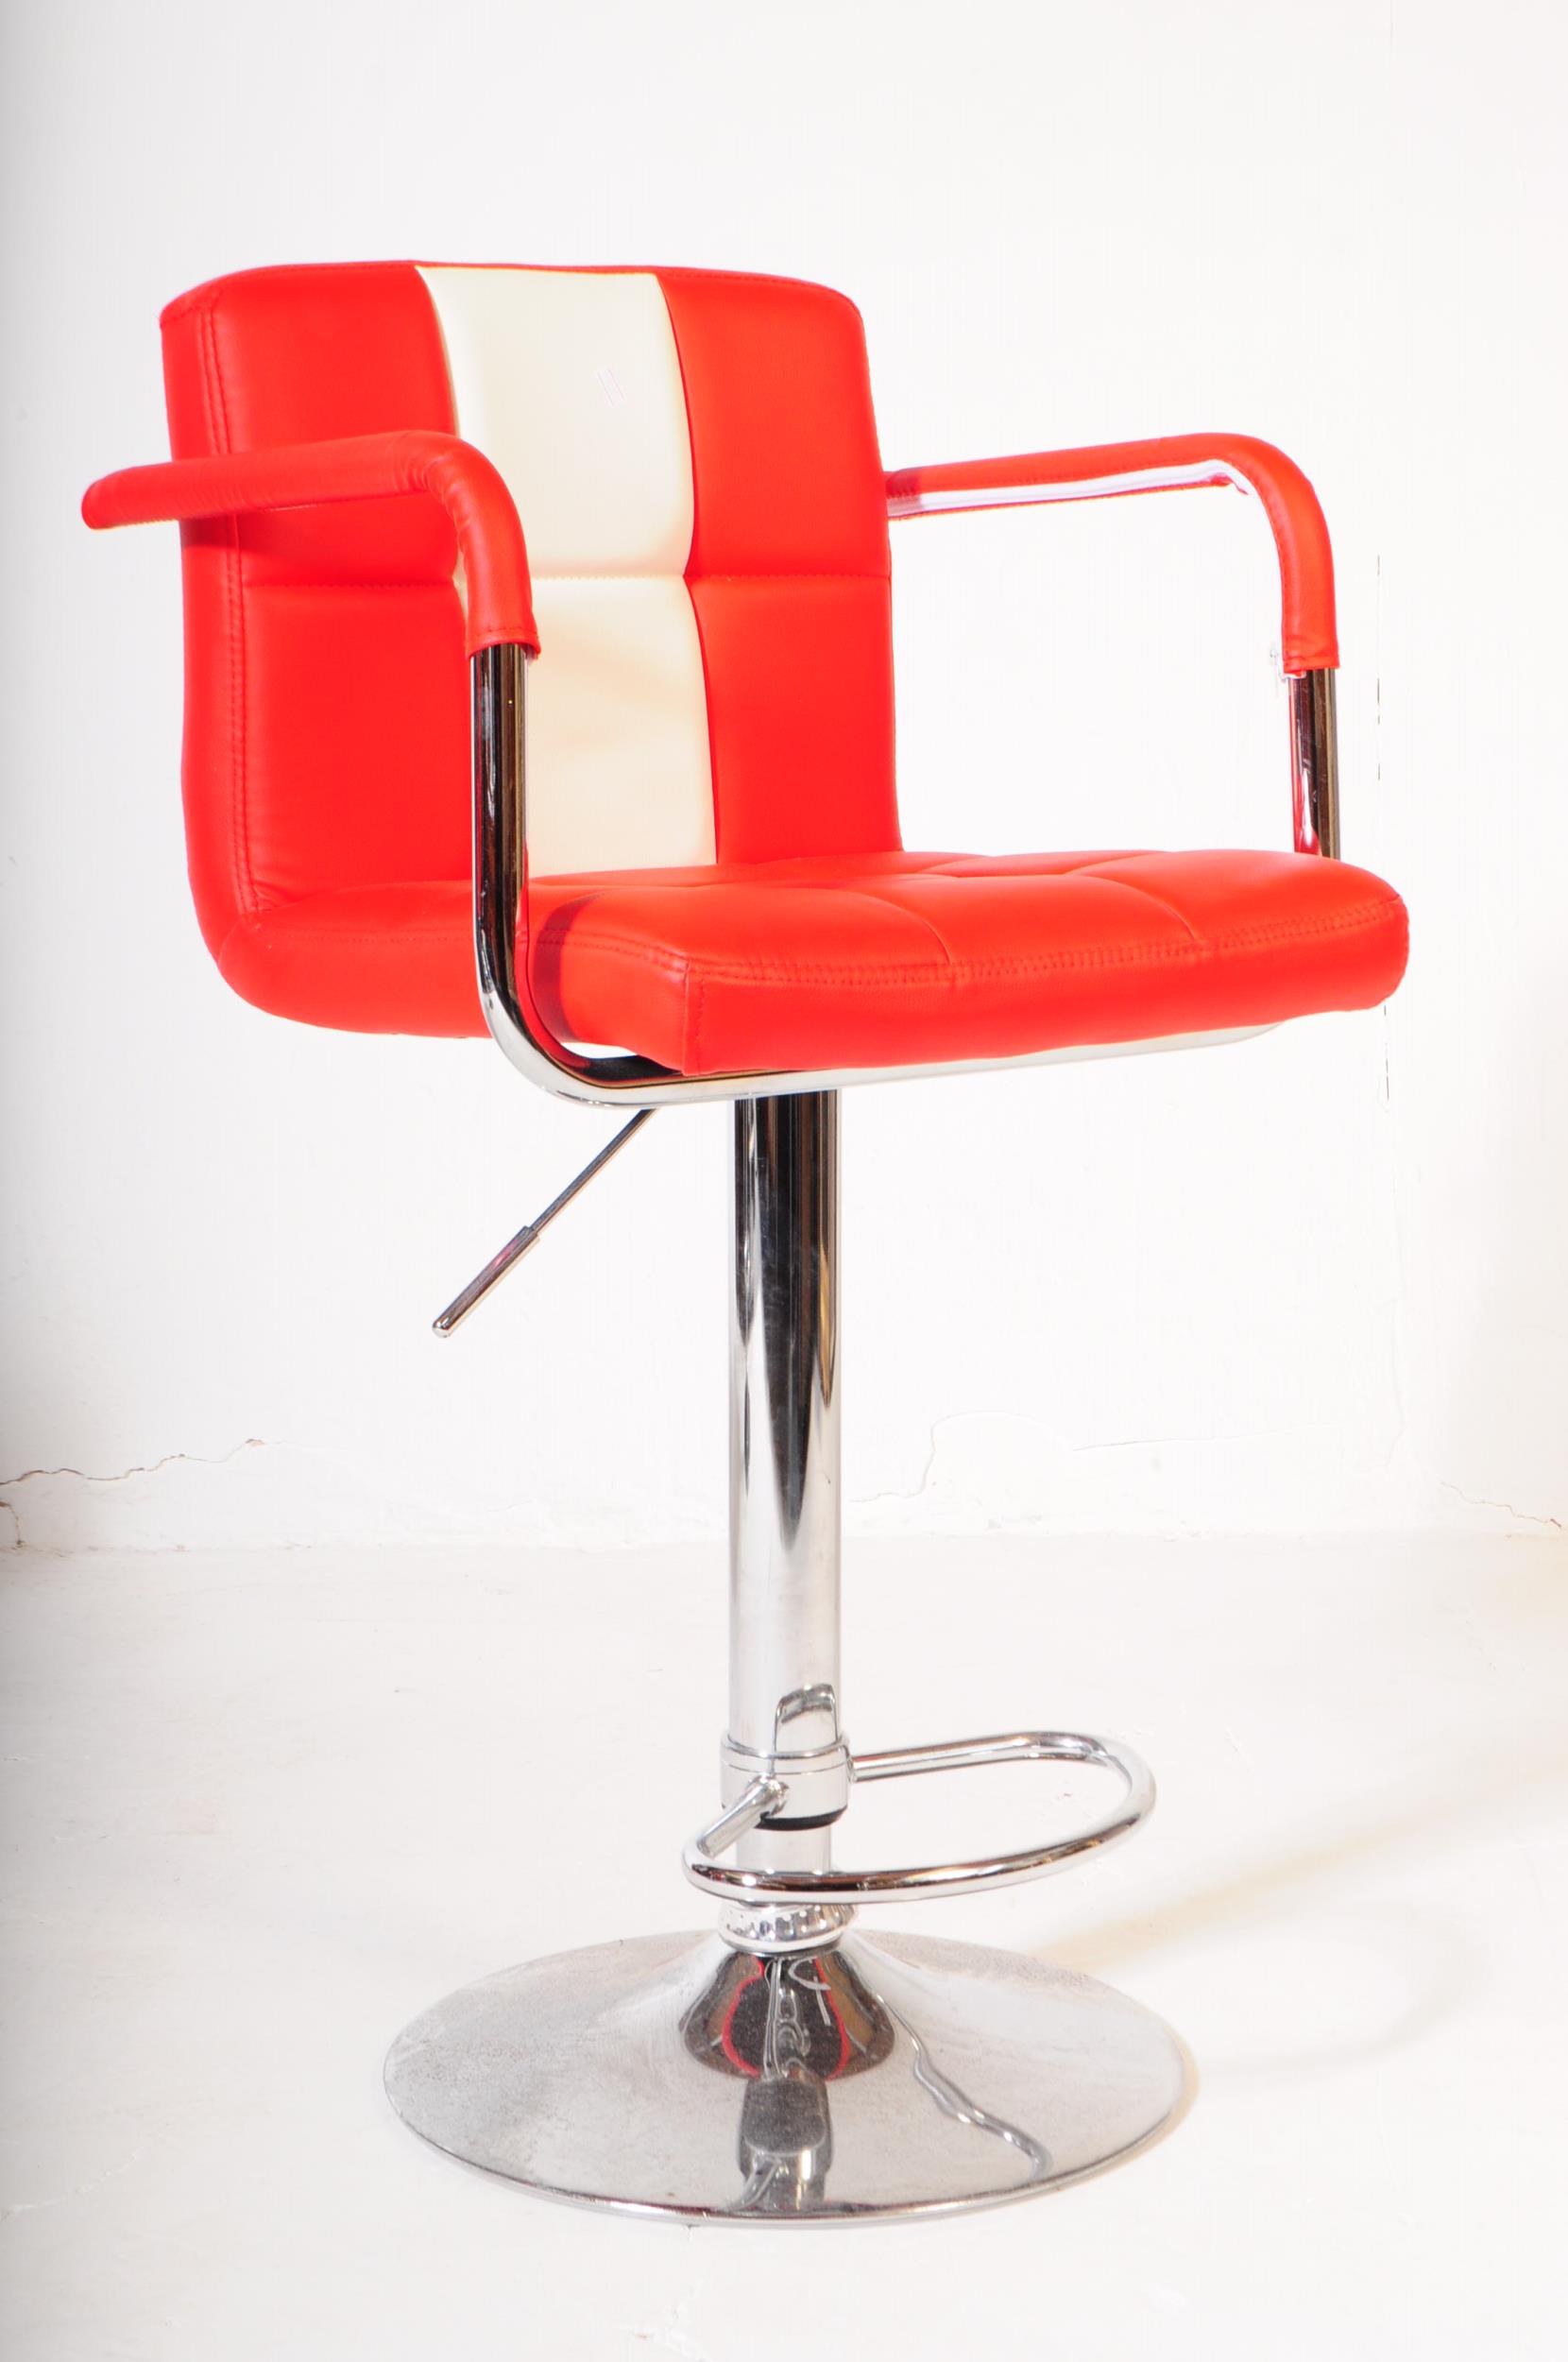 PAIR OF CONTEMPORARY VINYL RED & WHITE BAR STOOLS - Image 5 of 6